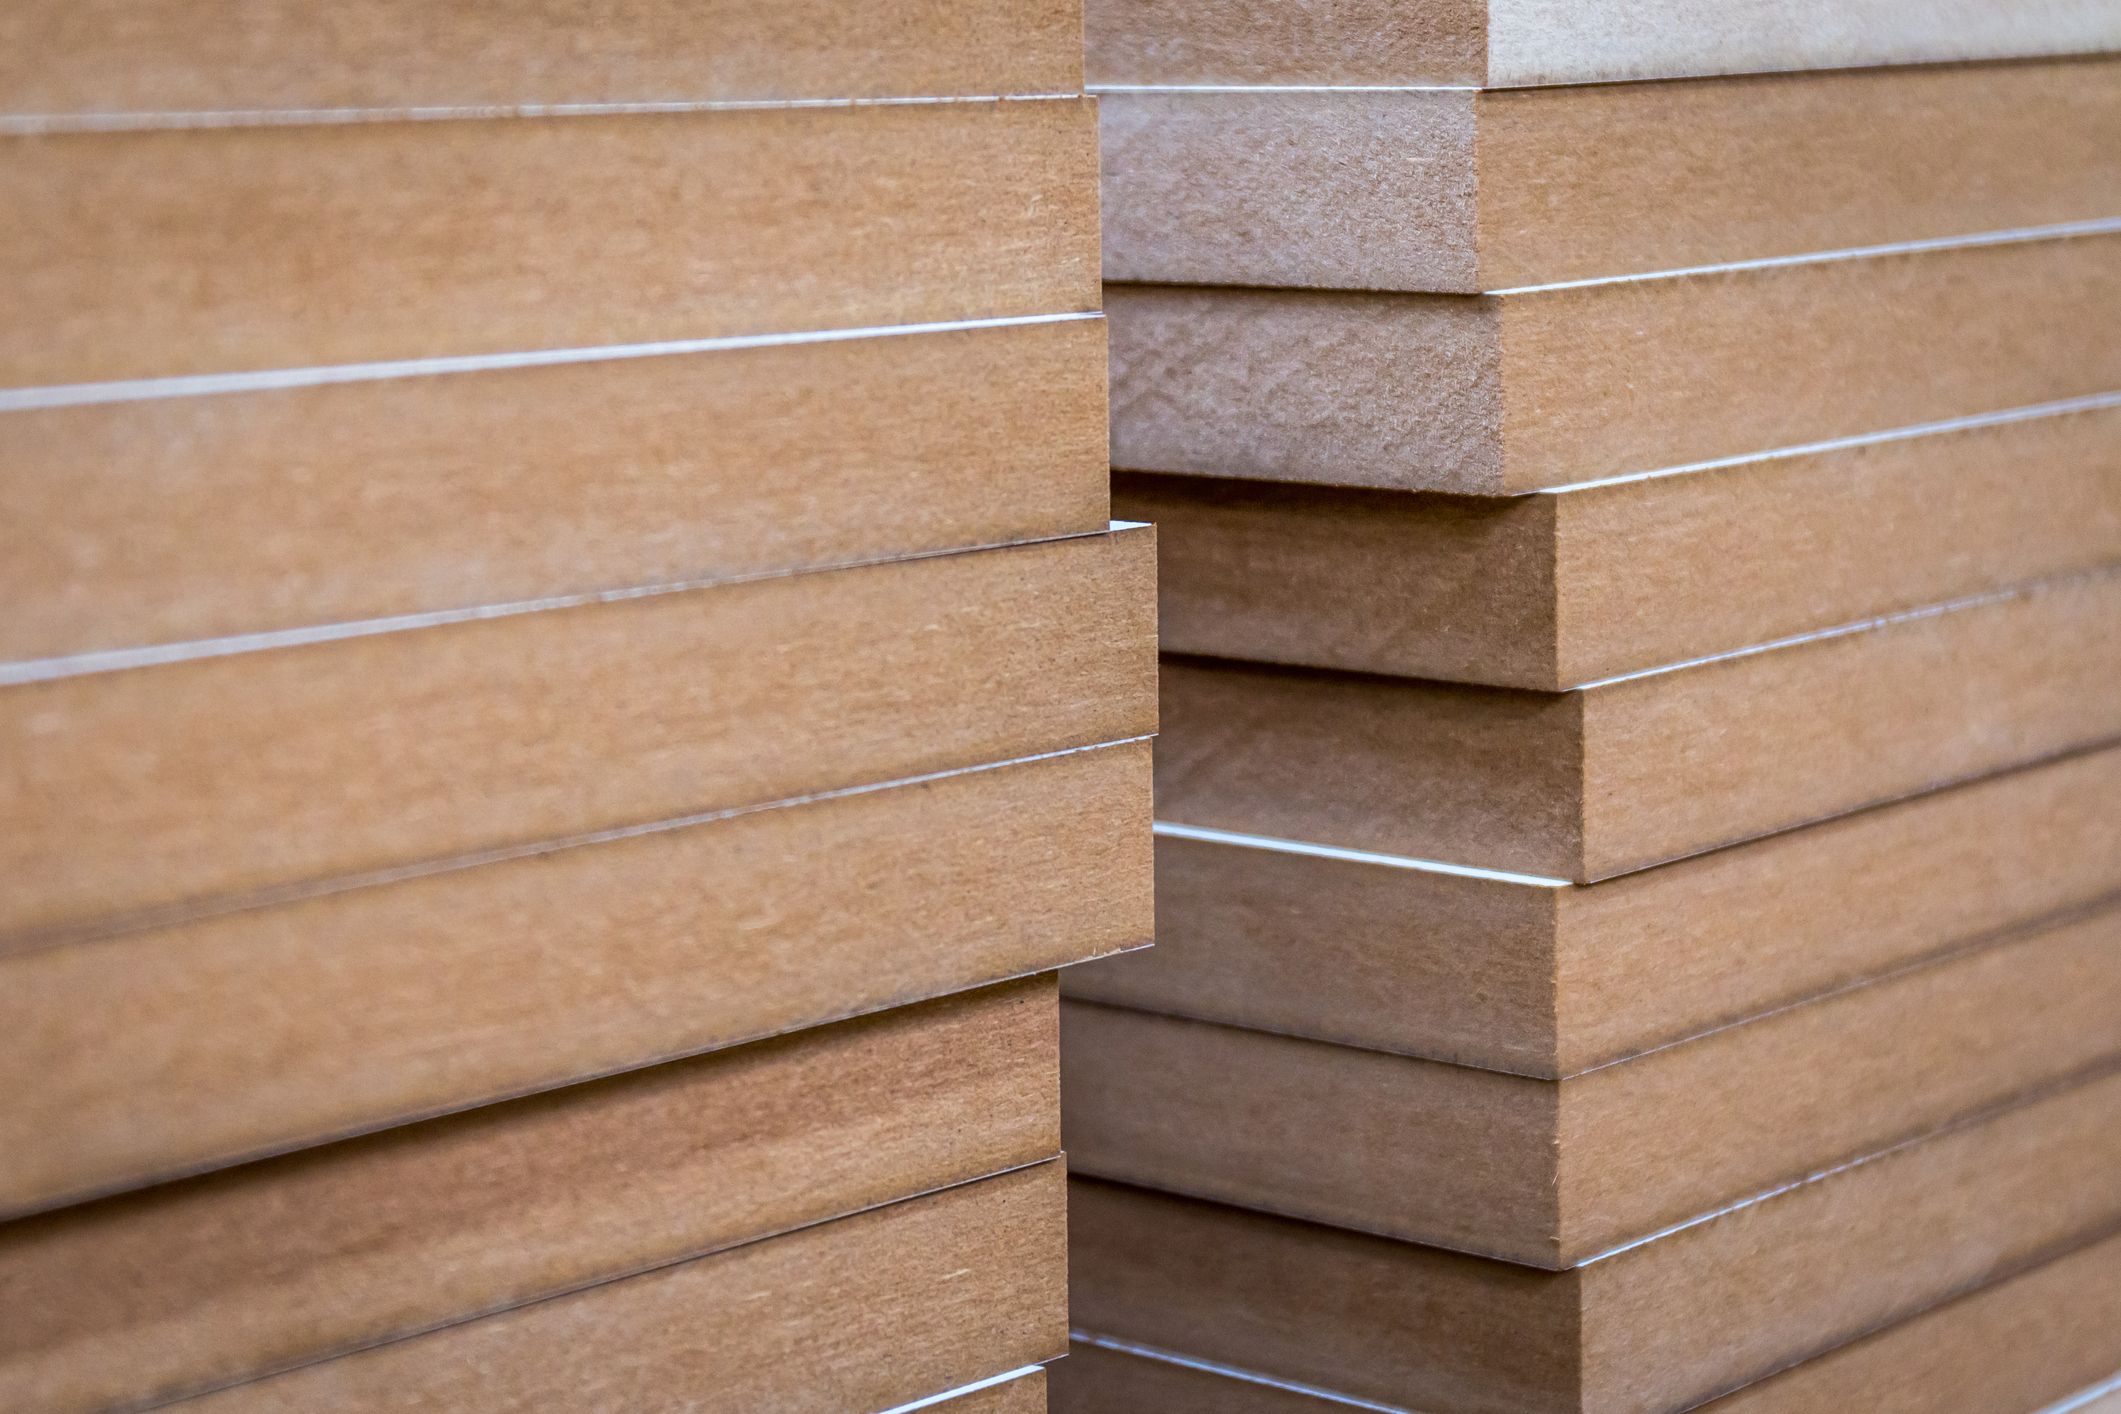 What Is MDF Board? A Hidden Health Hazard In Your Home